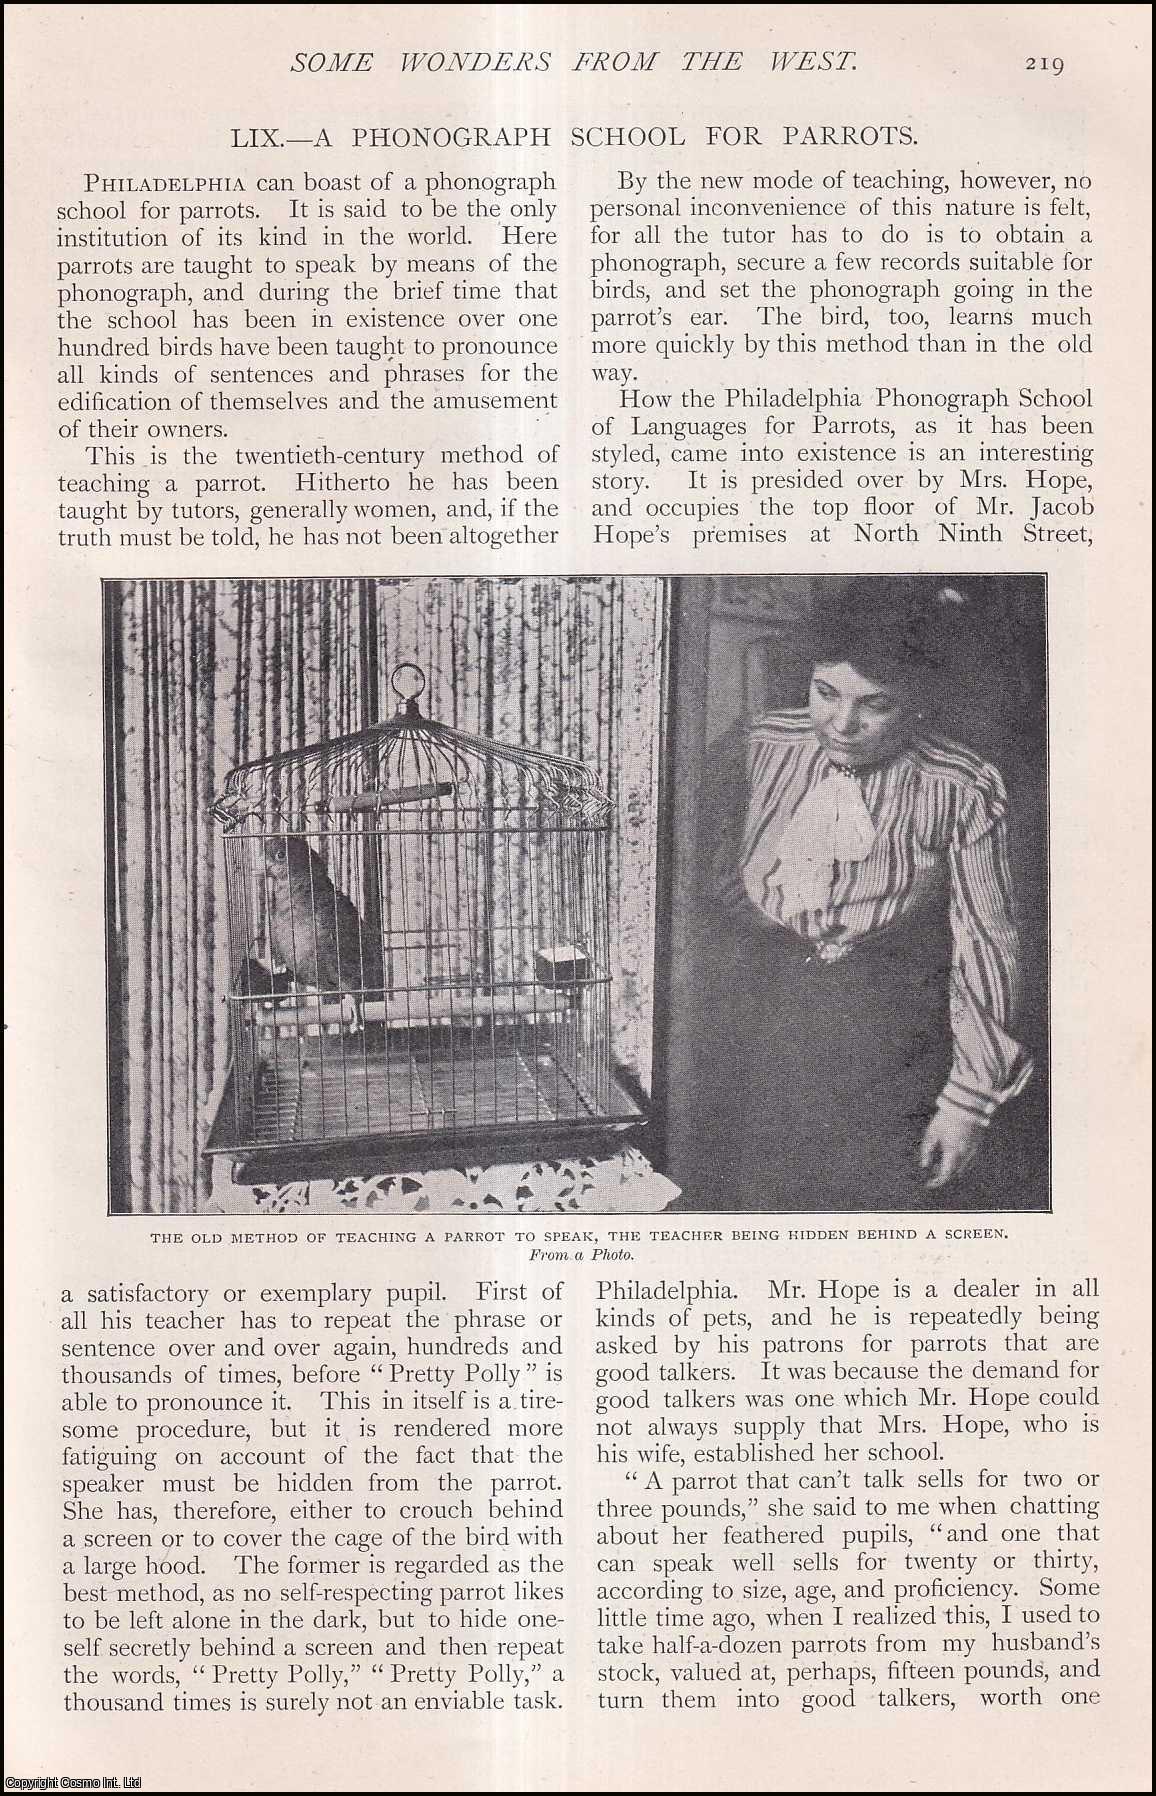 Unstated - A Phonograph School for Parrots, Philadelphia. An uncommon original article from The Strand Magazine, 1903.